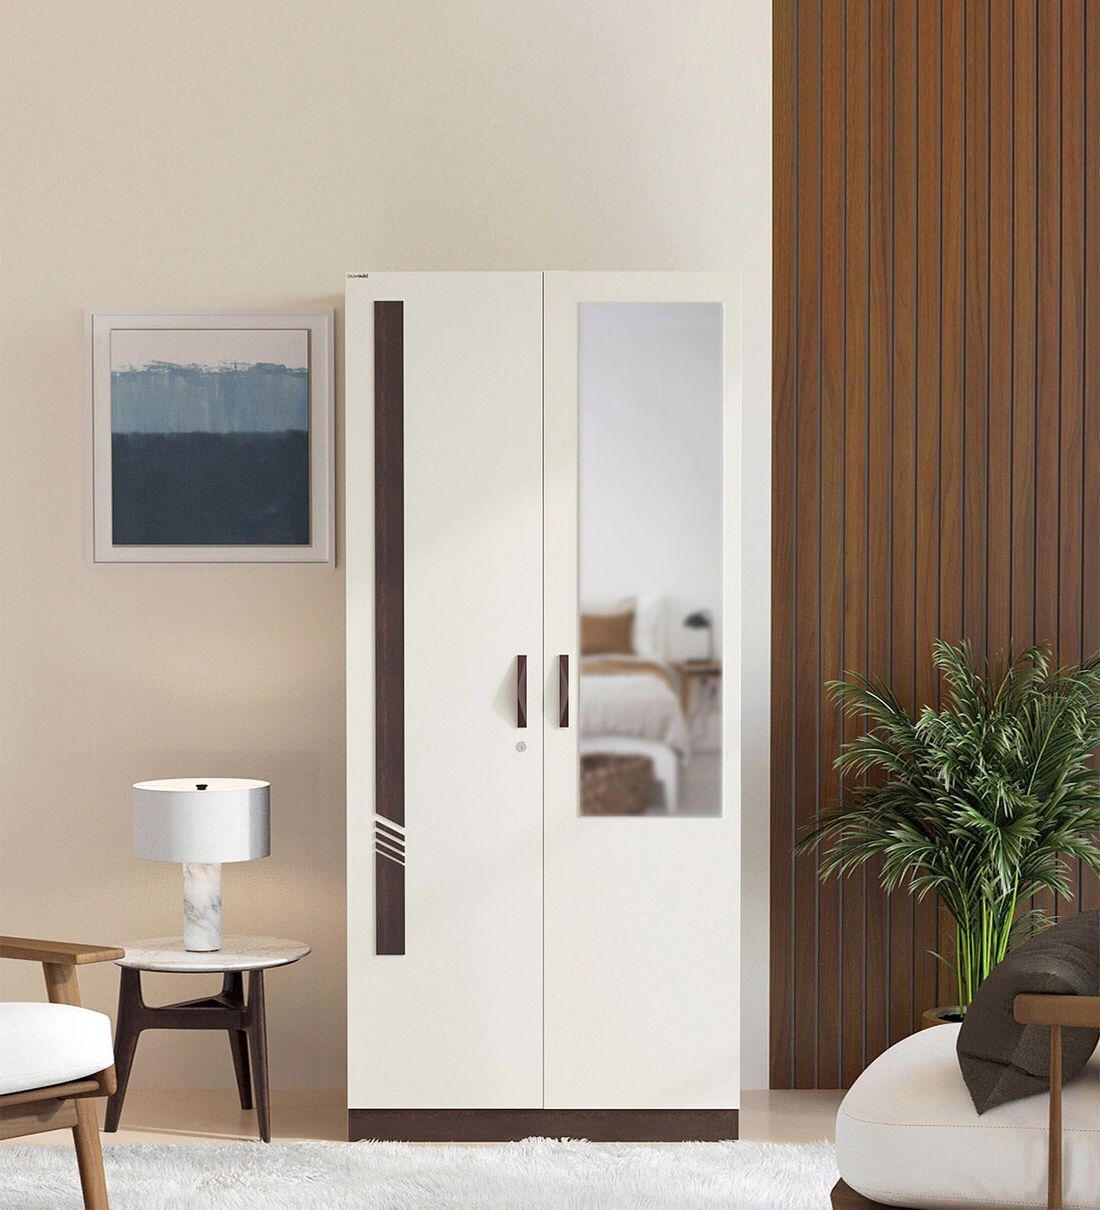 Buy Andrie 2 Door Wardrobe In Wenge & White Finish With Mirror At 26% Off Bluewud | Pepperfry Regarding Single White Wardrobes With Mirror (Gallery 11 of 20)